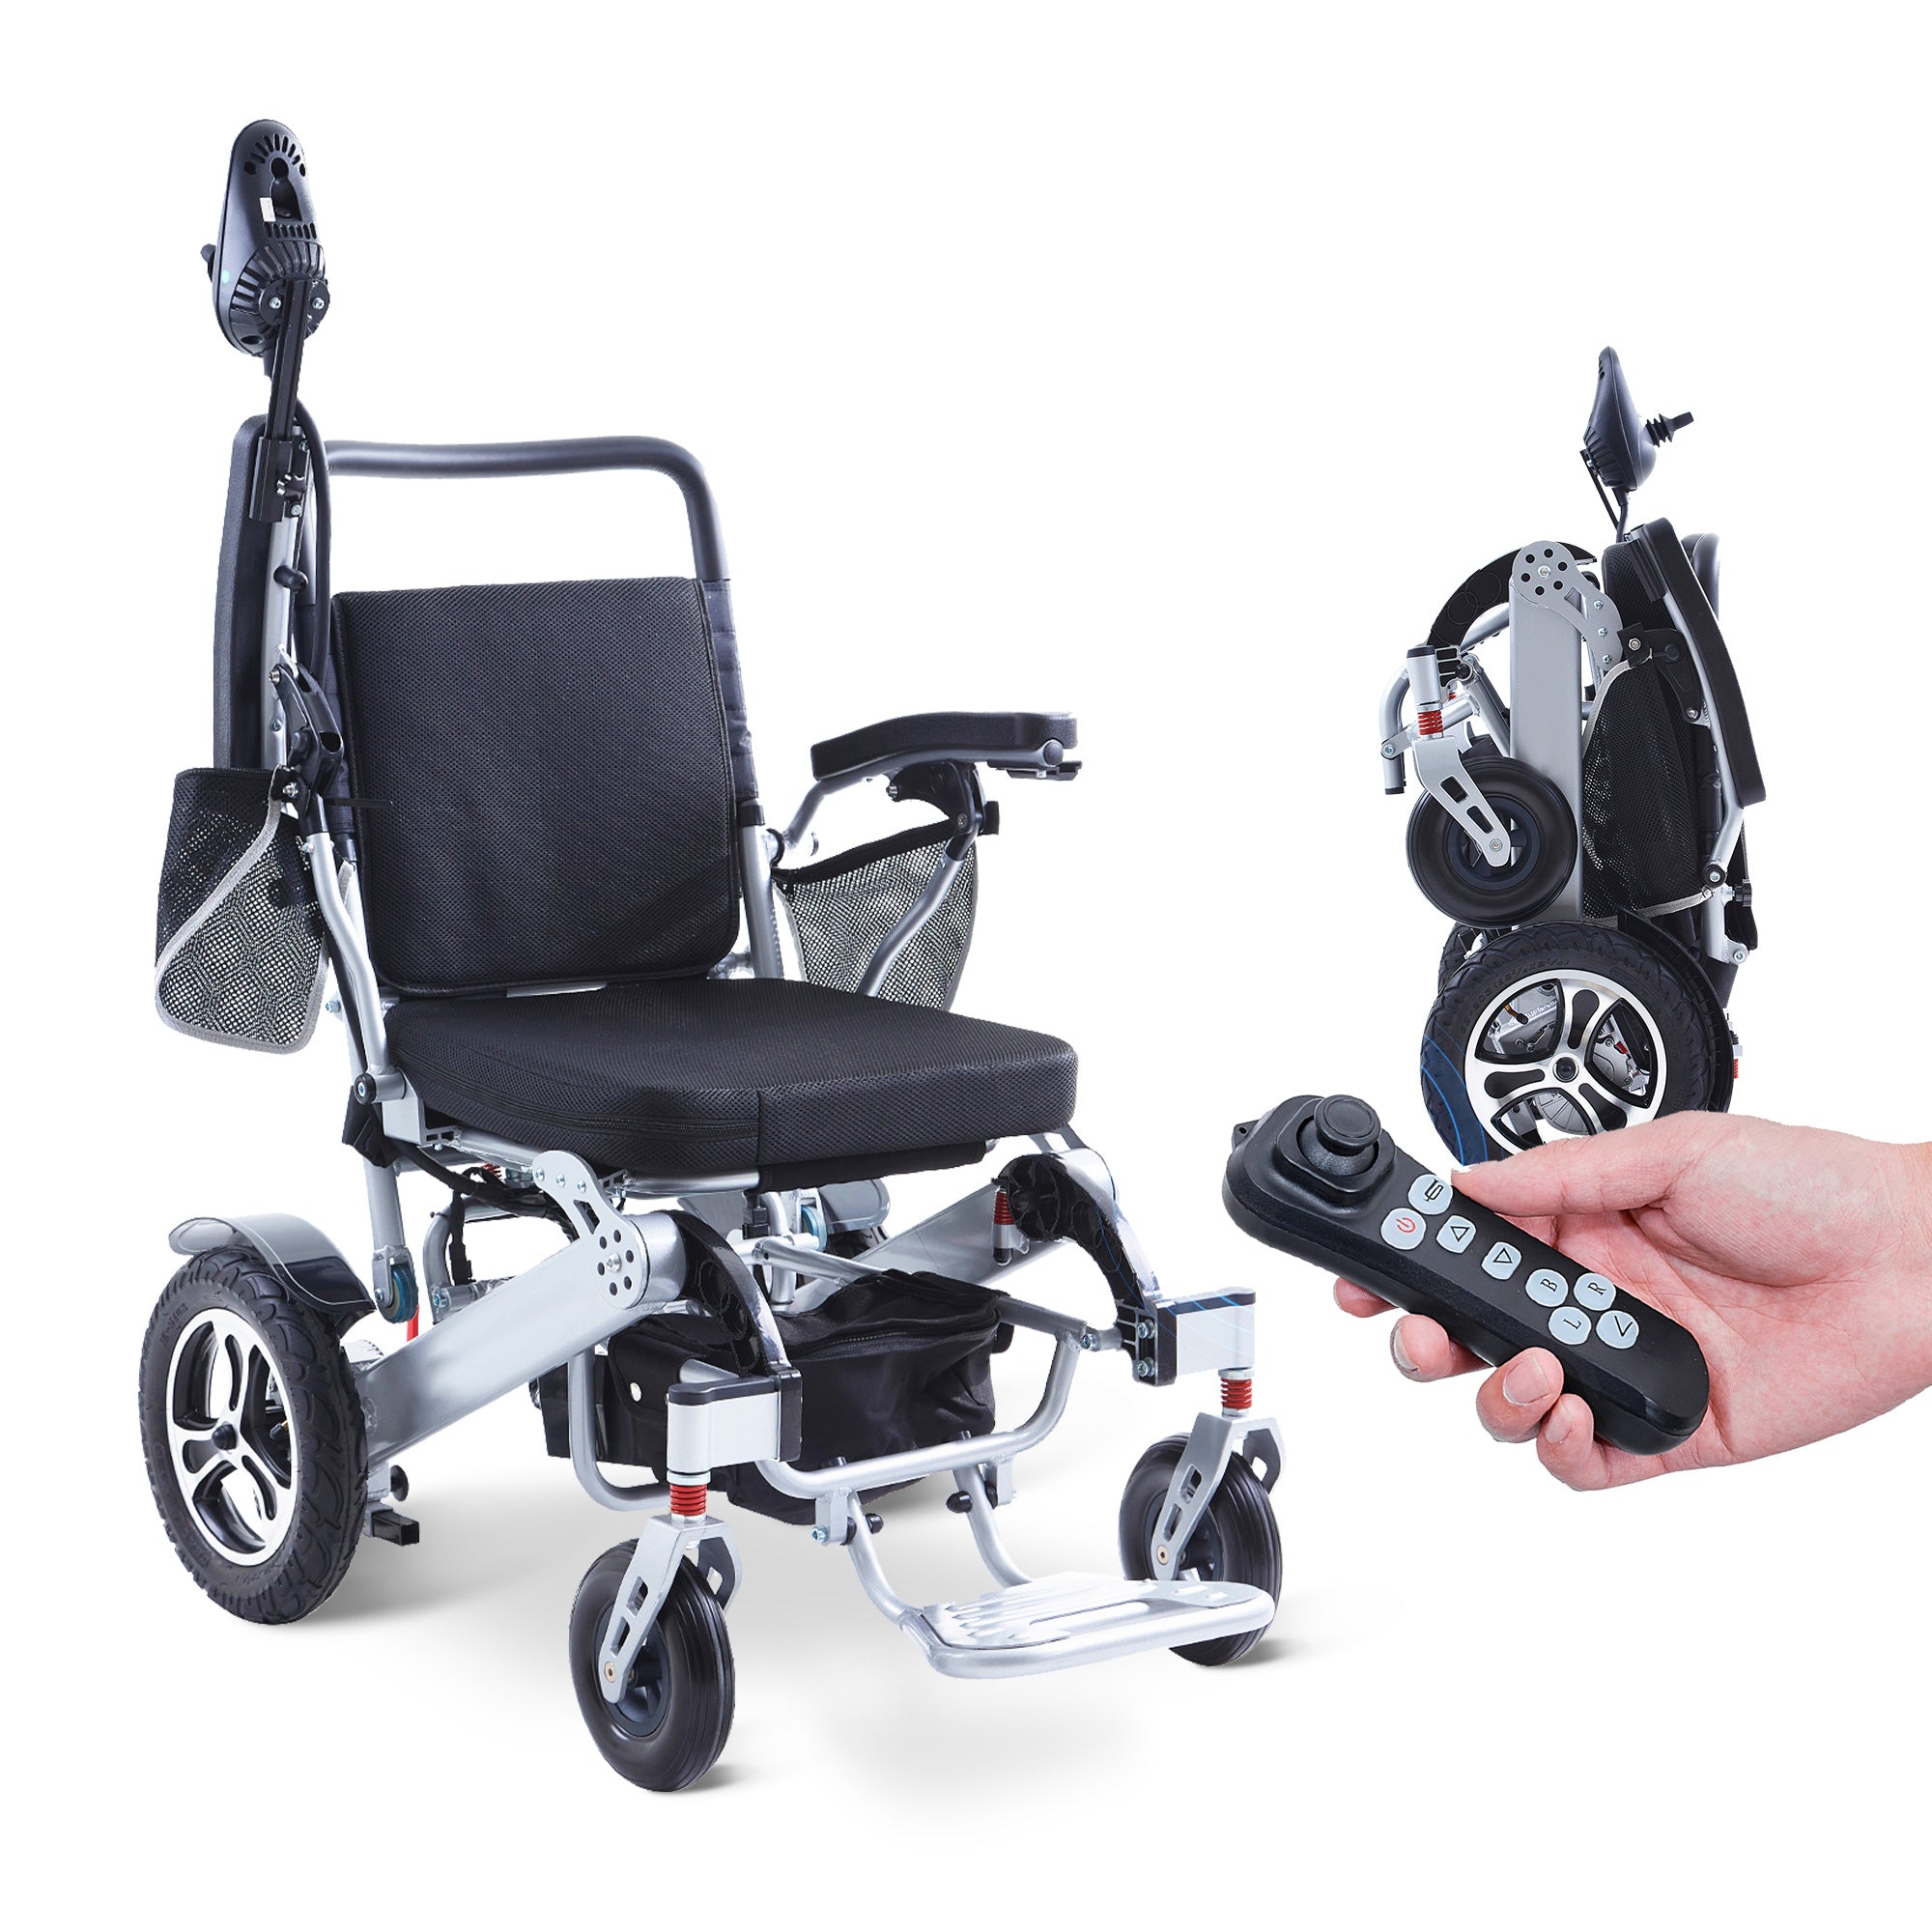 ActiWe WX17 Auto-folding Electric Wheelchair -Foldable with One Click- Power Wheelchair for Adults